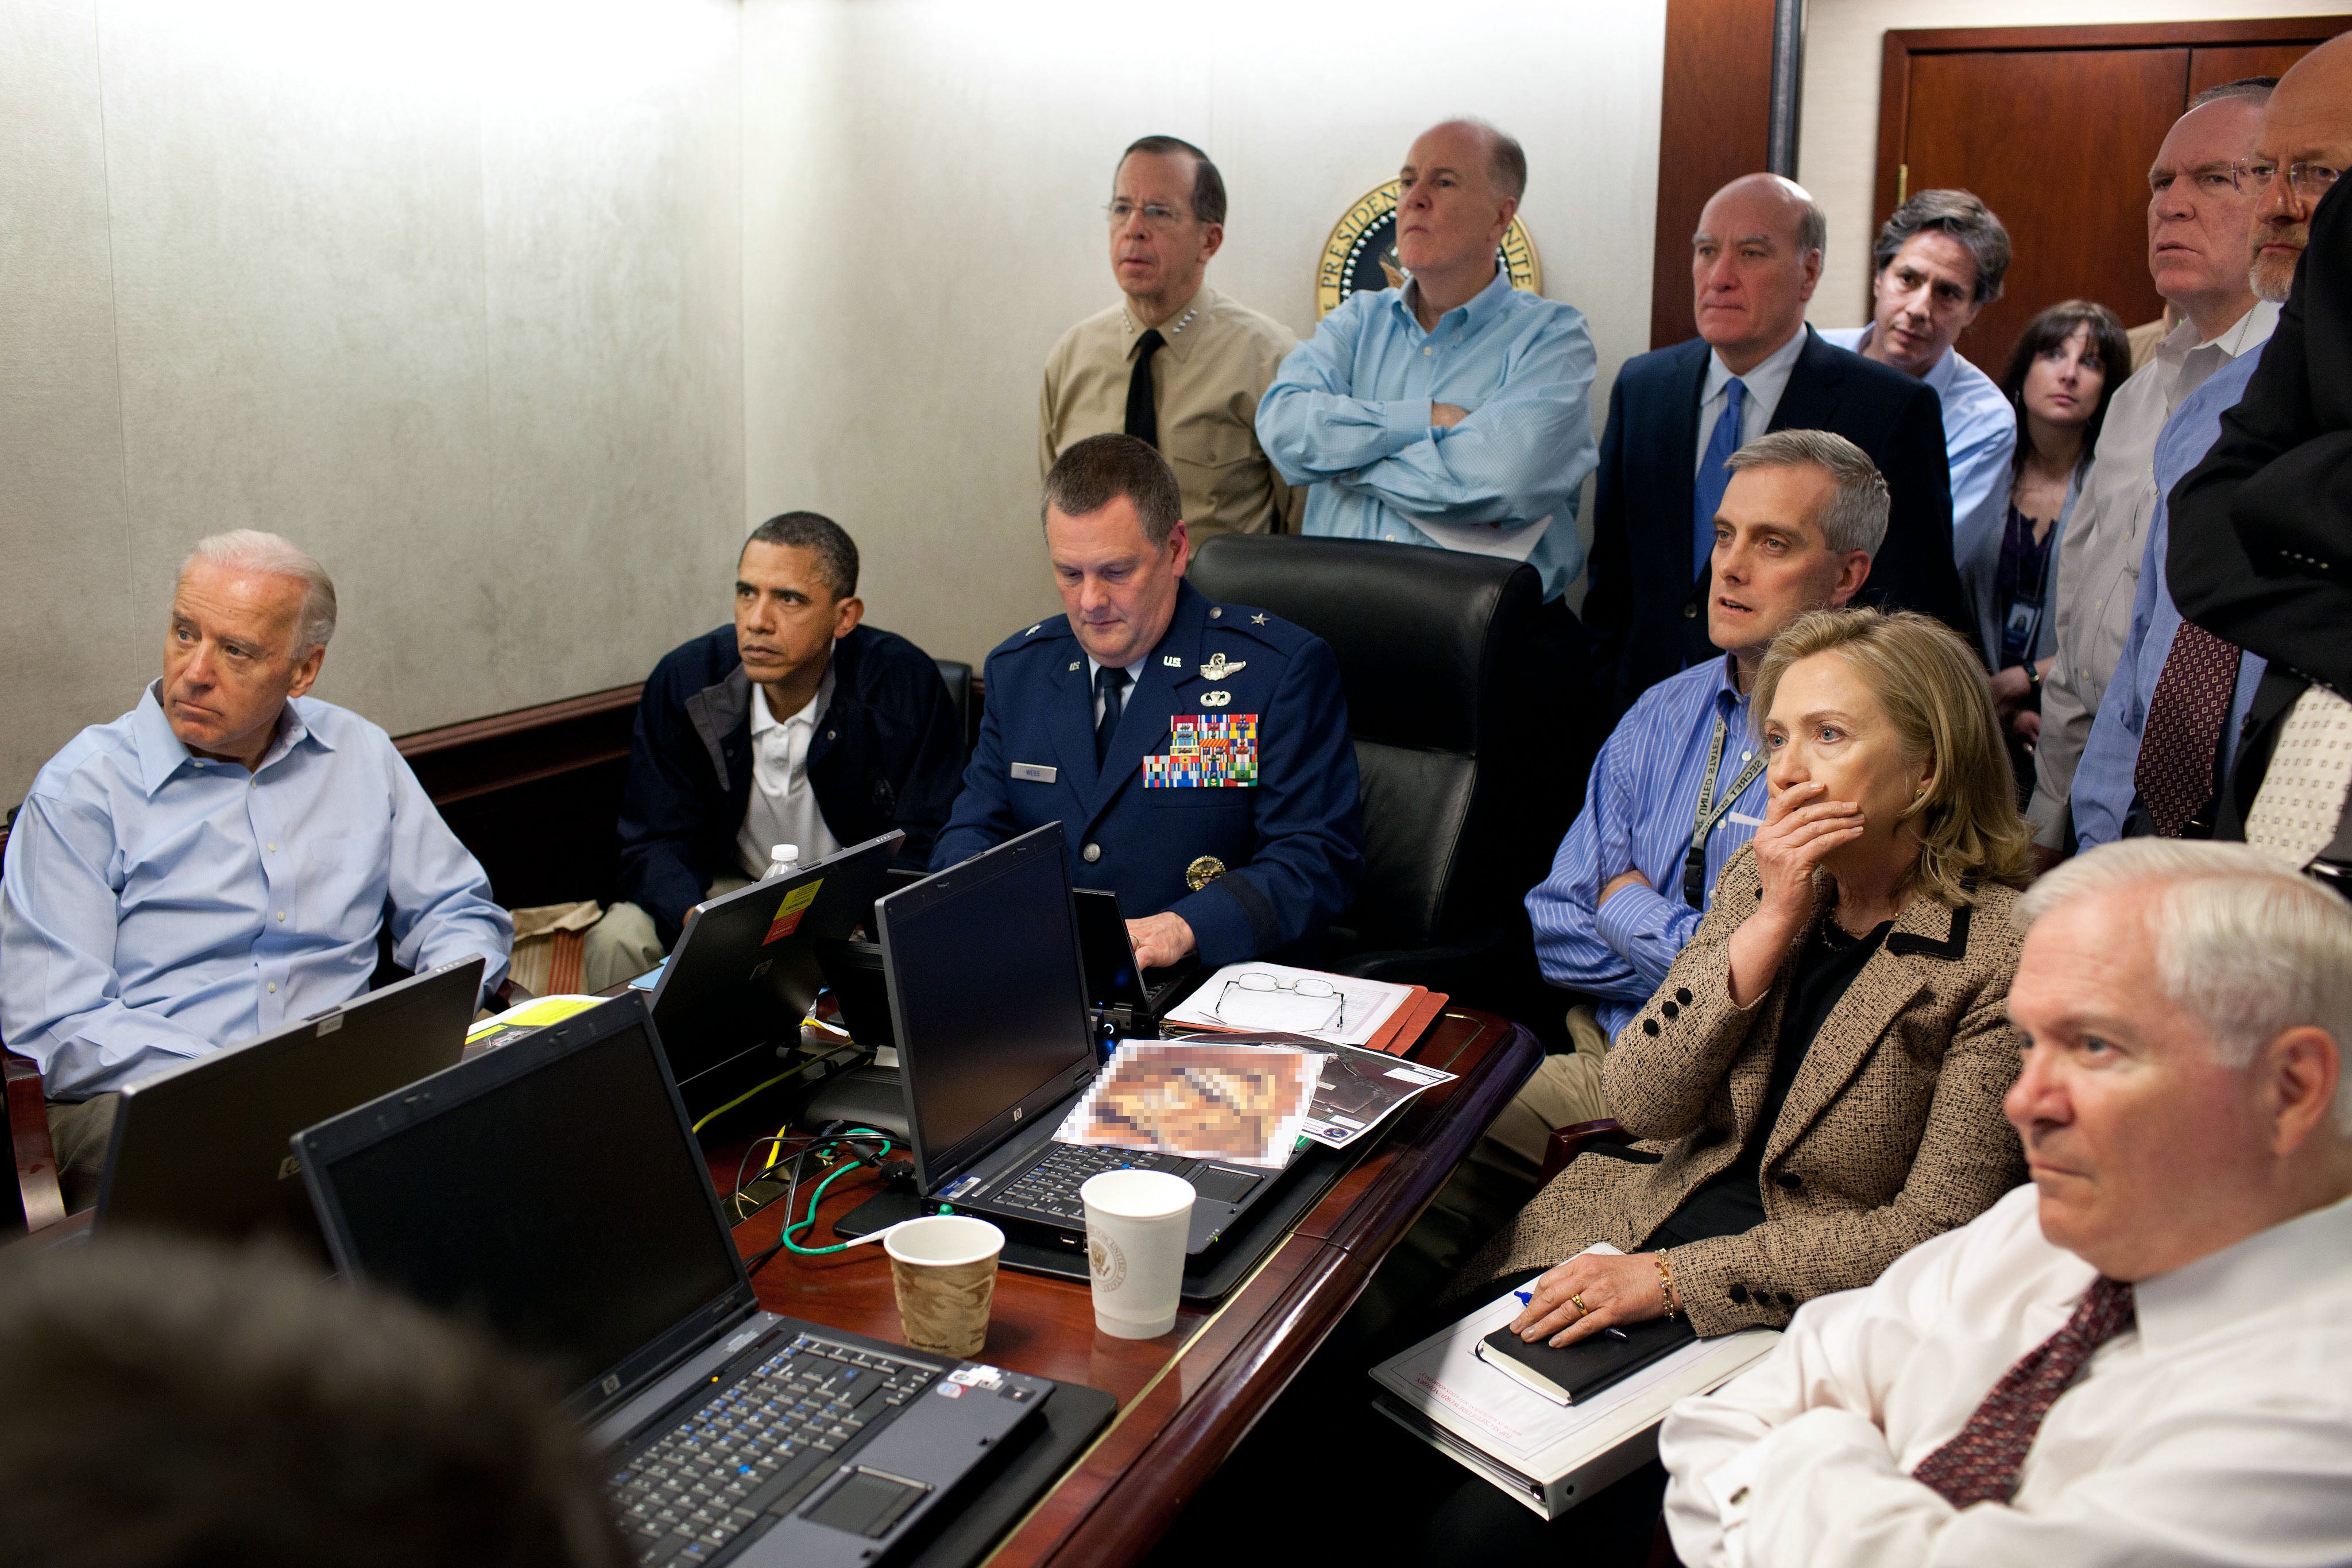 Biden was among those watching the 2011 US military operation that killed Bin Laden